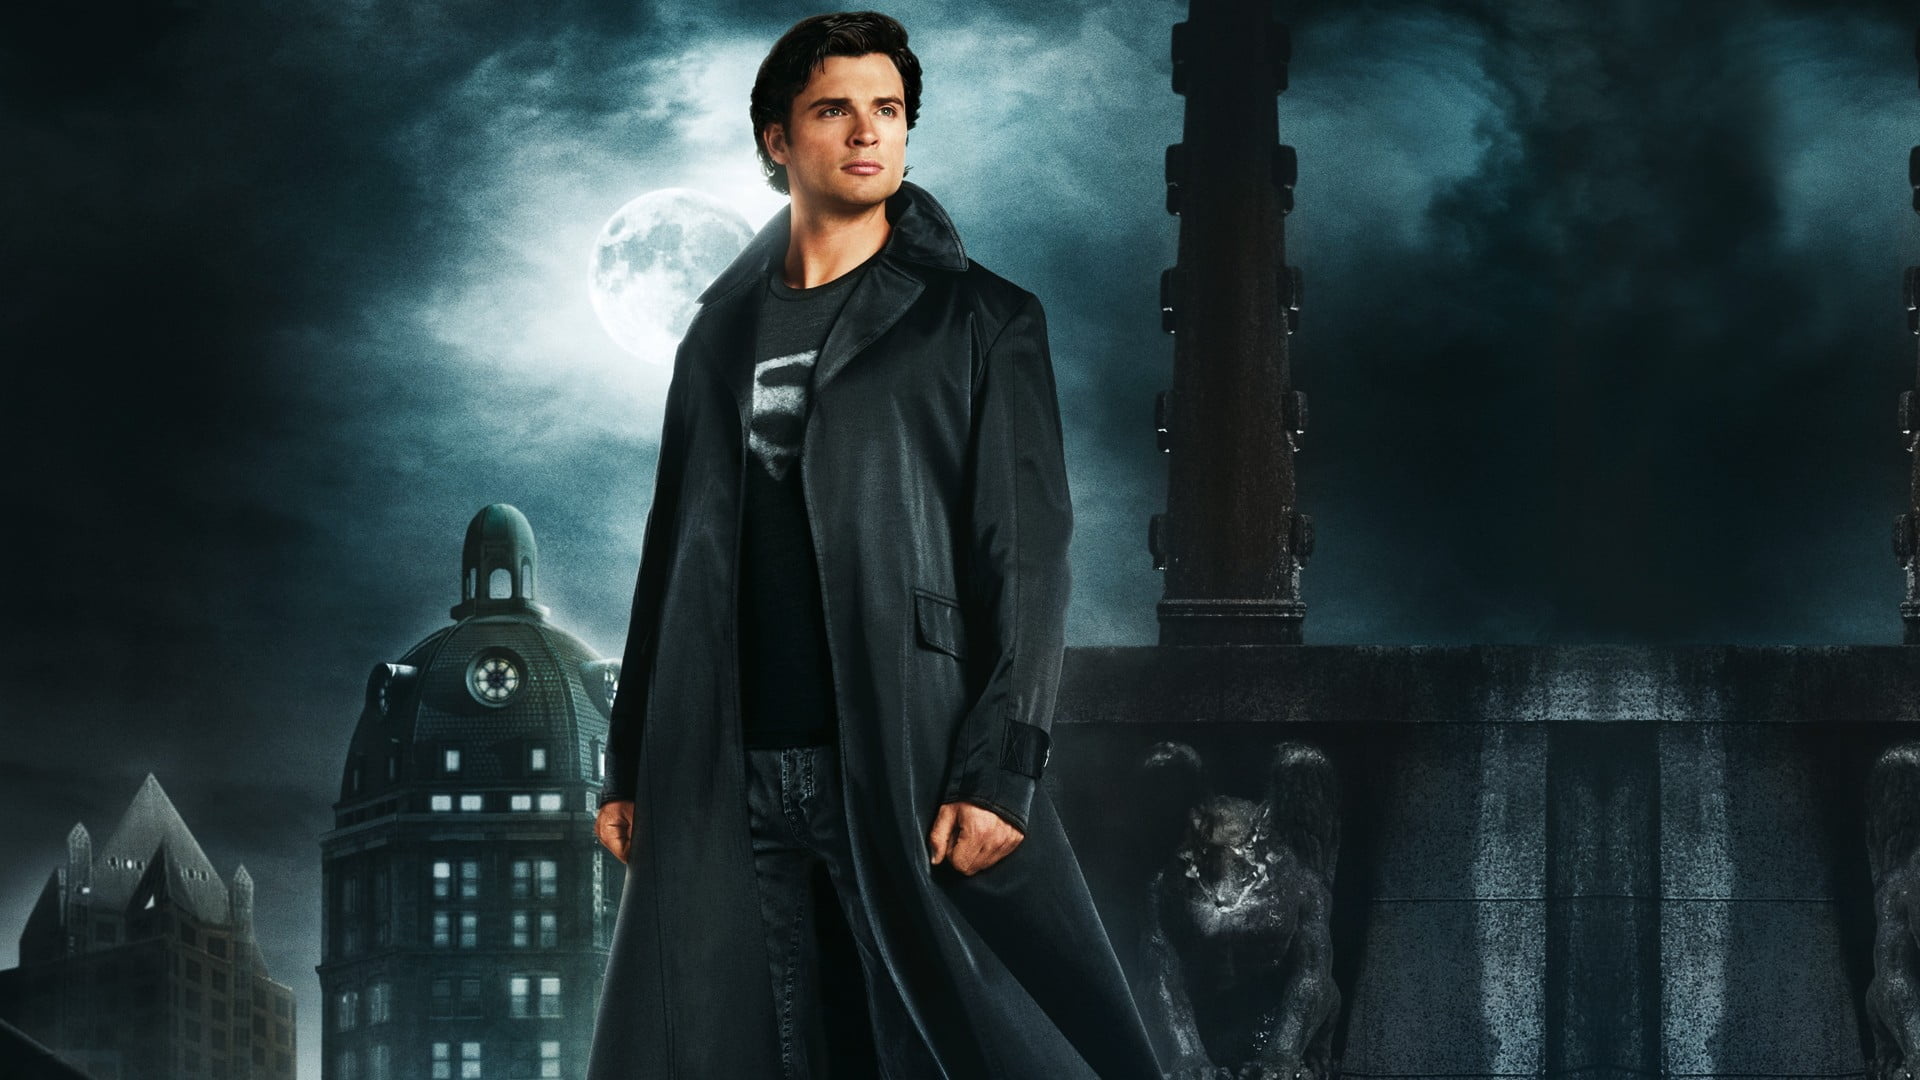 Smallville (TV Series): Clark Kent, Coming to grips with his emerging superpowers, Tom Welling, Popular TV shows. 1920x1080 Full HD Wallpaper.